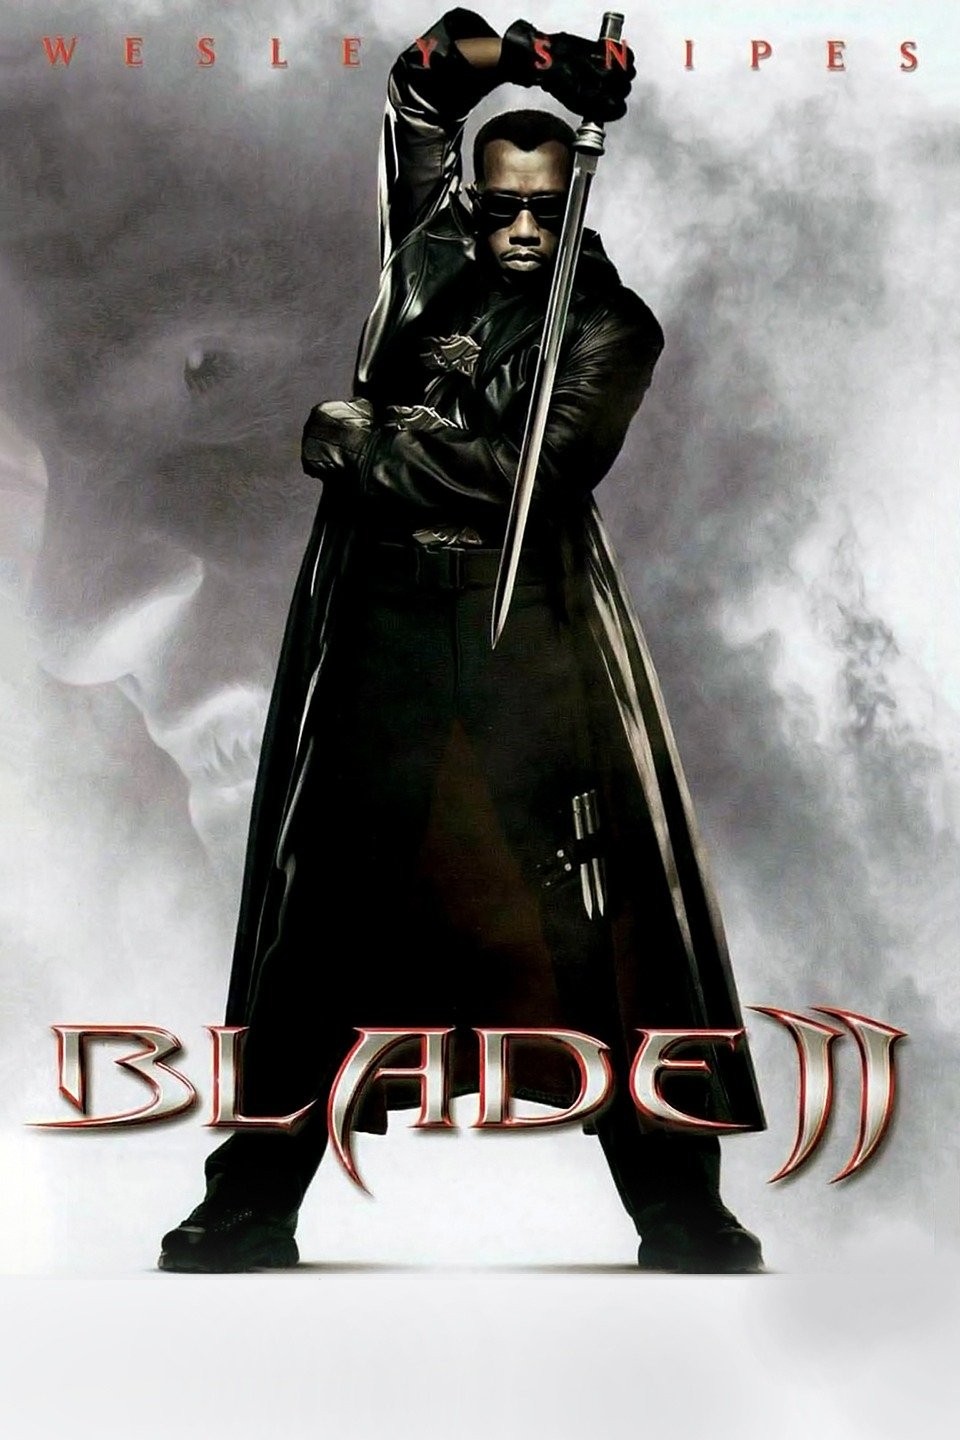 Blade II' Was Decades Ahead of Its Time - The Ringer